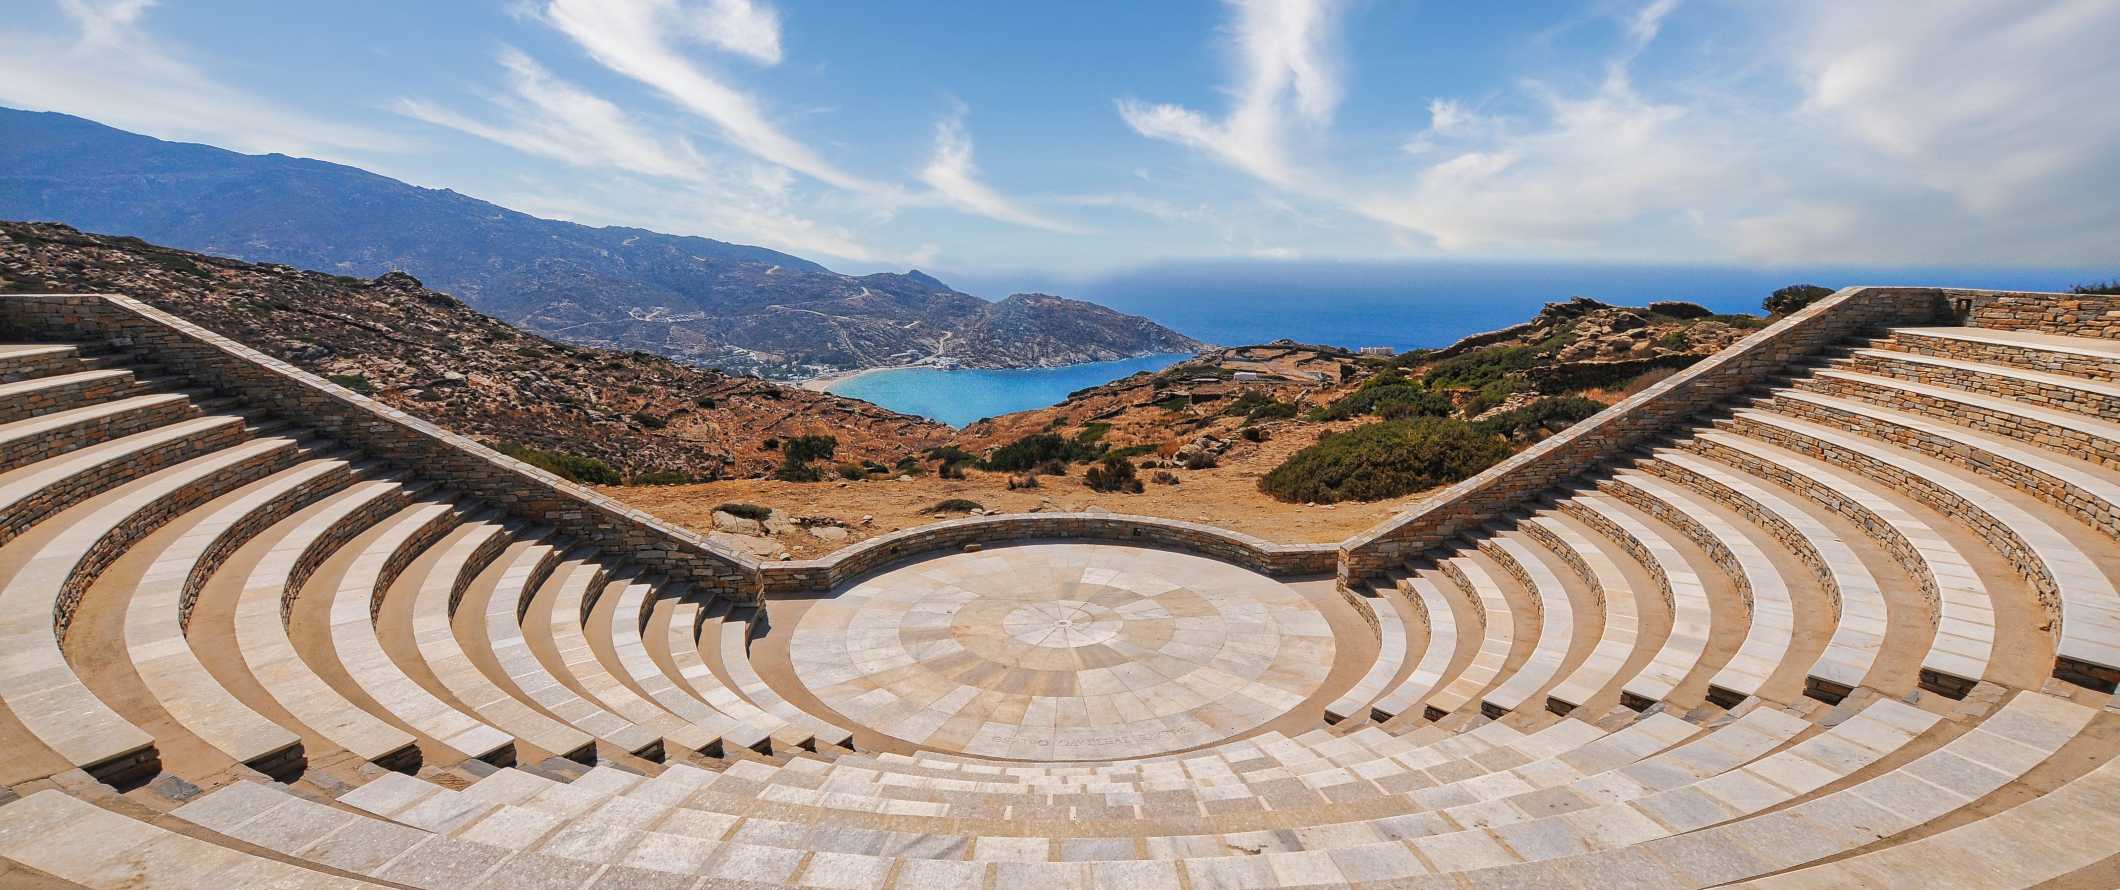 Panoramic view of modern open-air amphitheatre overlooking hilltops and the Mediterranean Sea in Ios, Greece